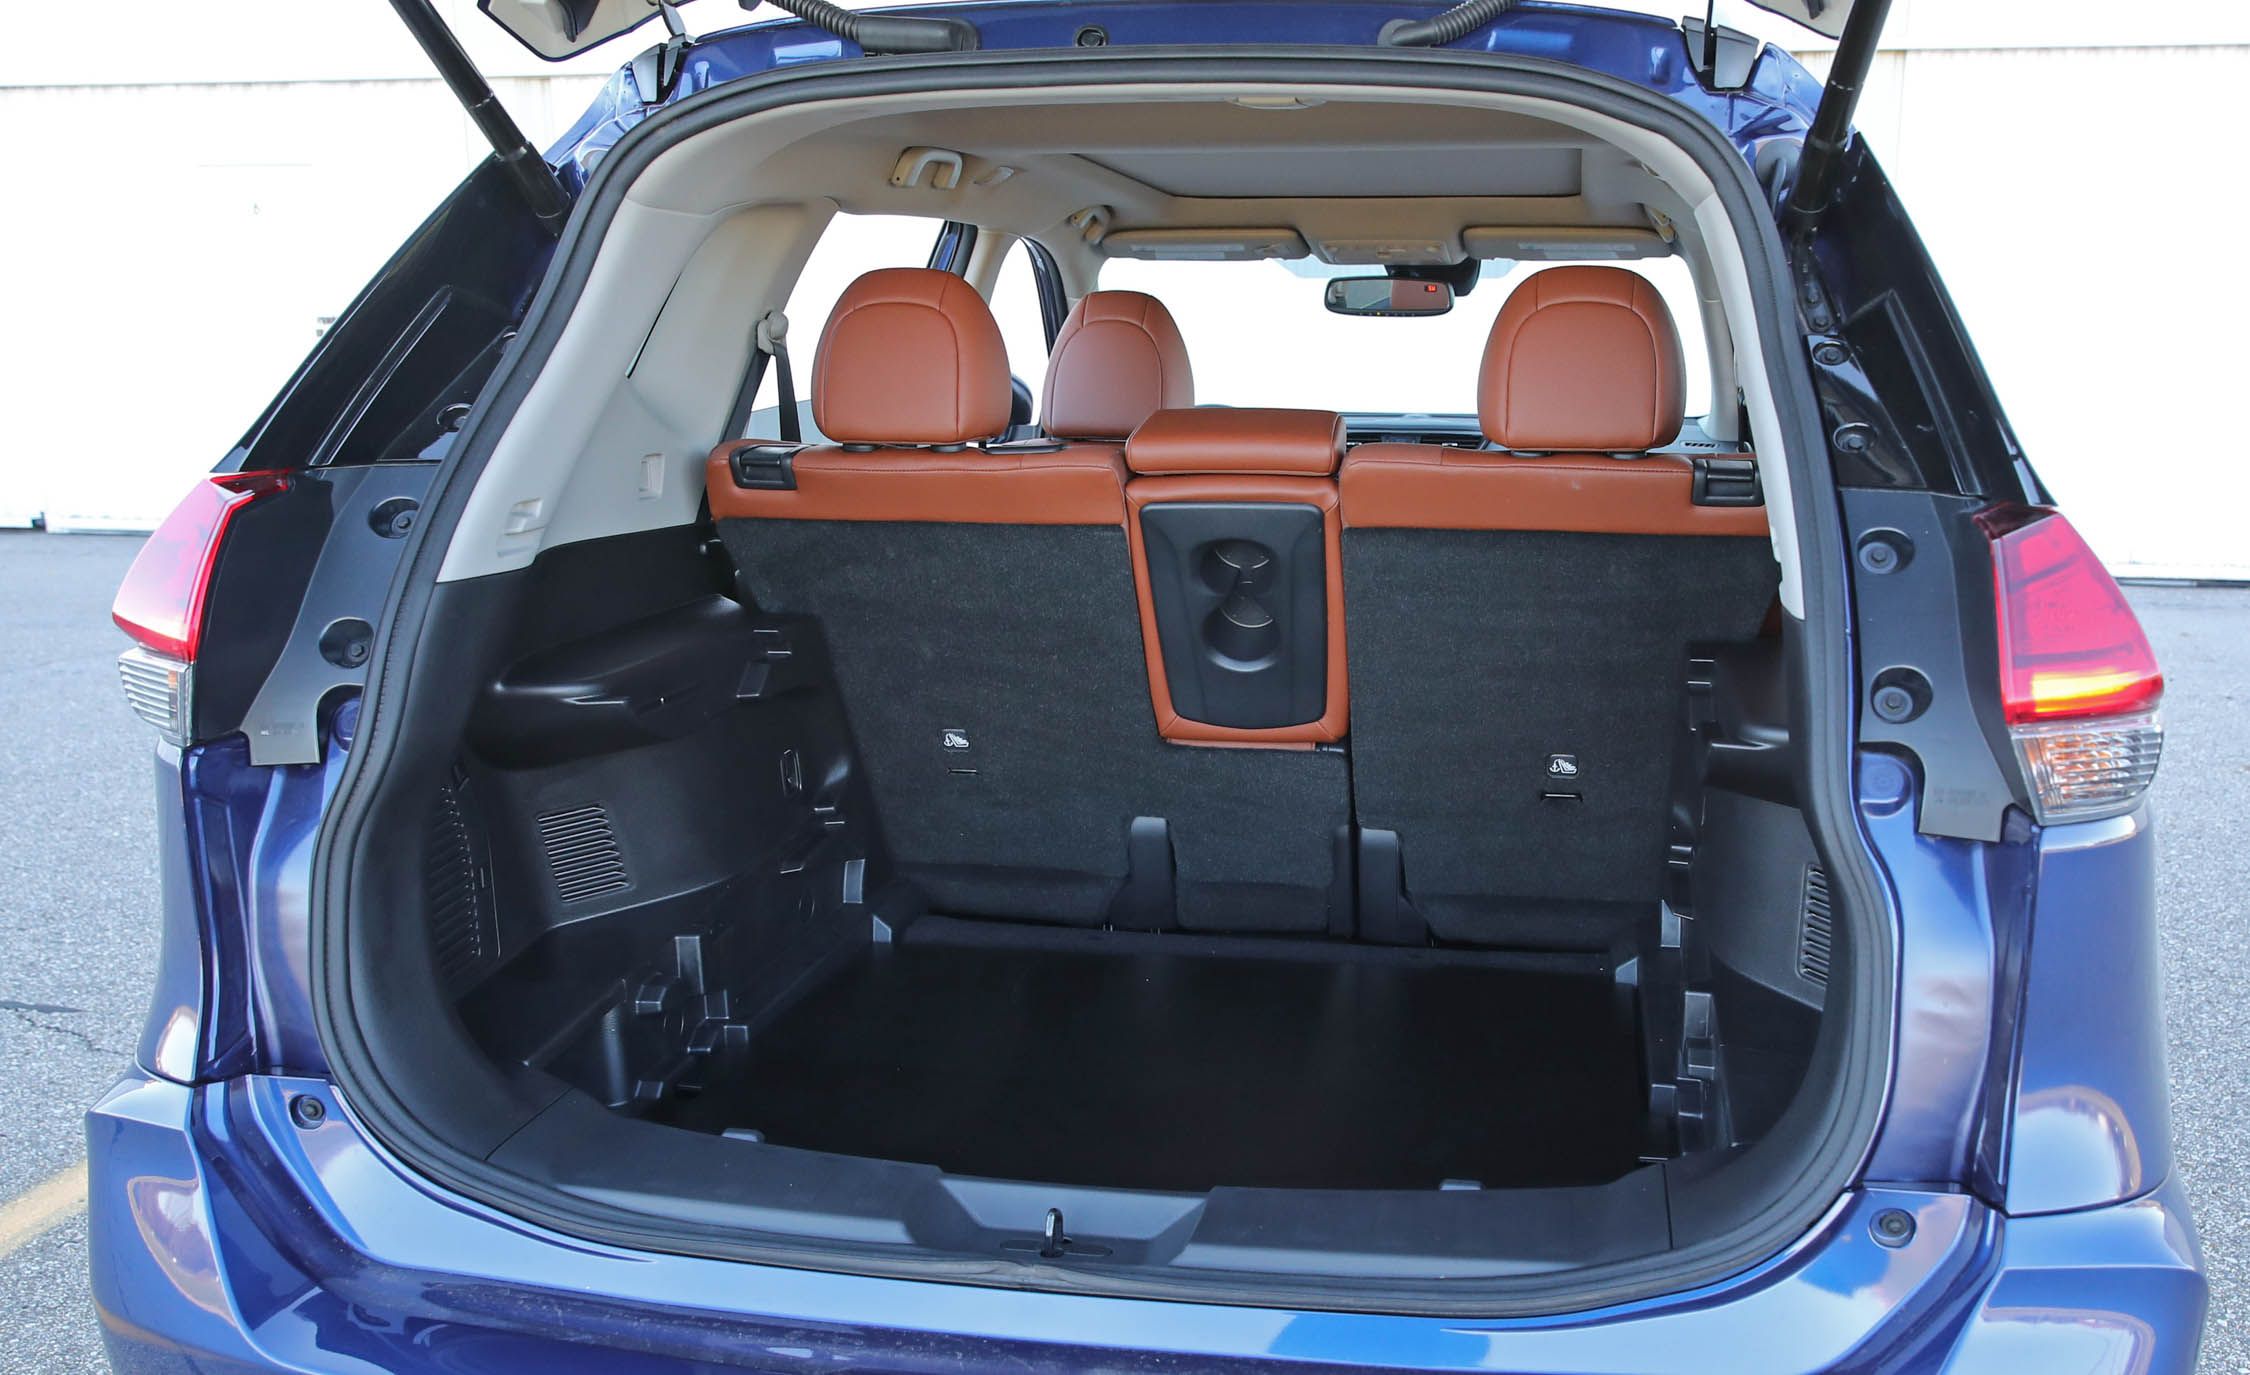 2017 Nissan Rogue Interior View Cargo Trunk (View 22 of 37)